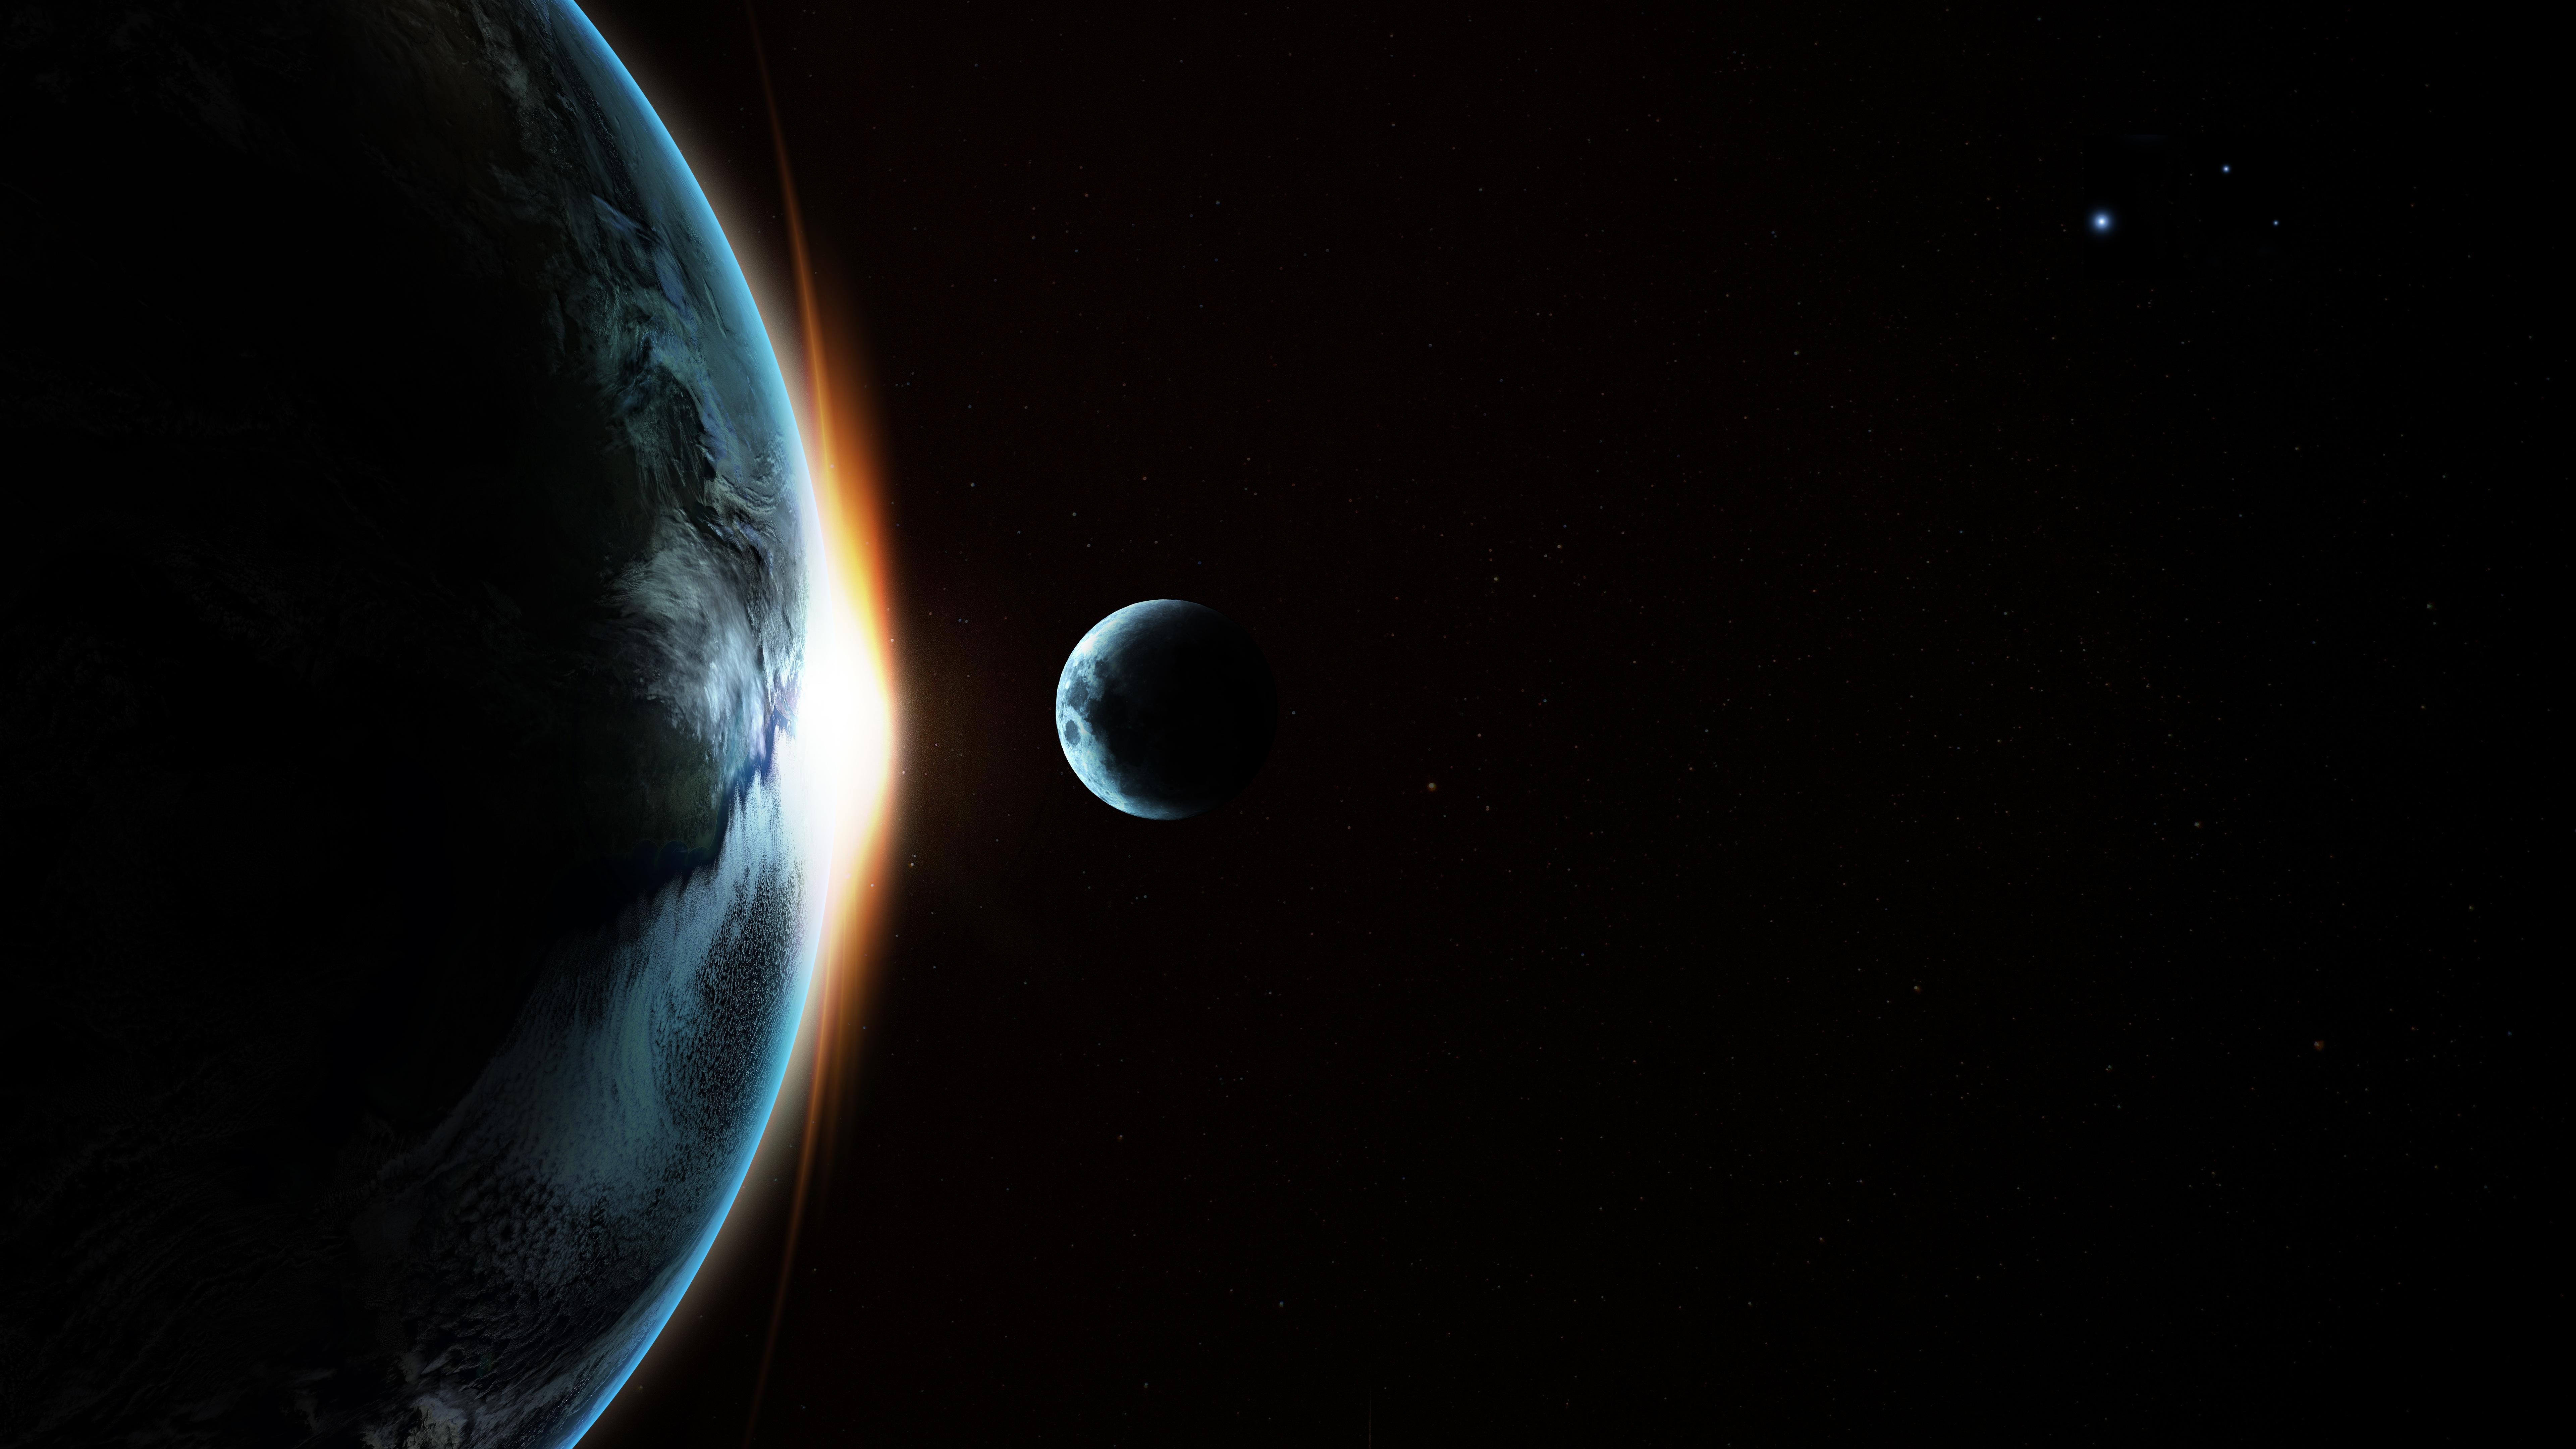 Download wallpapers 7680x4320 earth, moon, transit, galaxy hd backgrounds